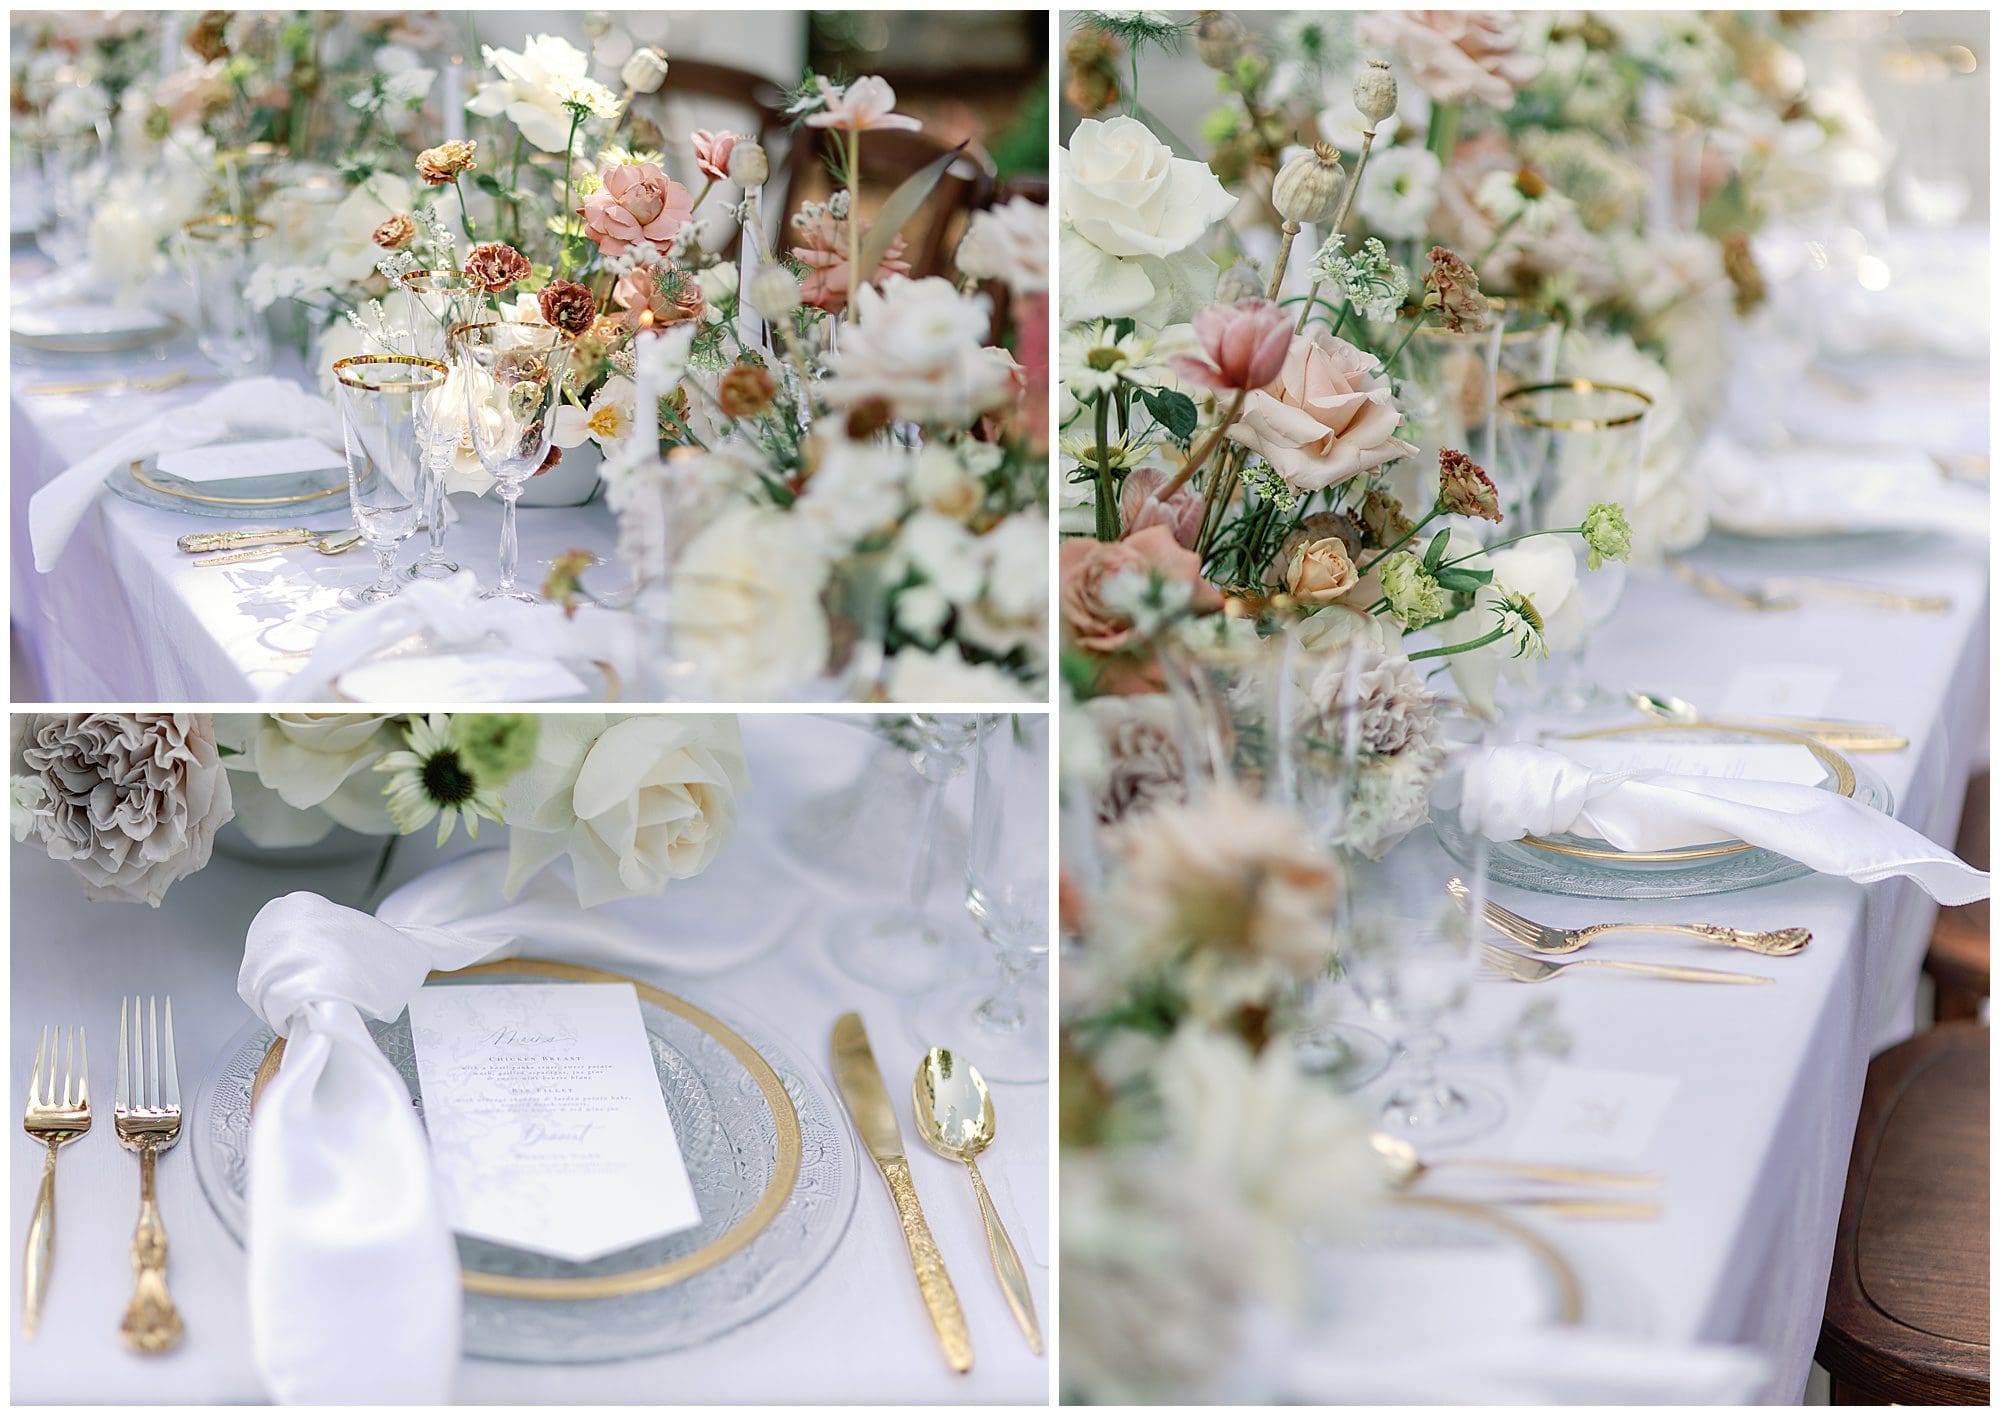 A table setting with white and pink flowers and silverware.